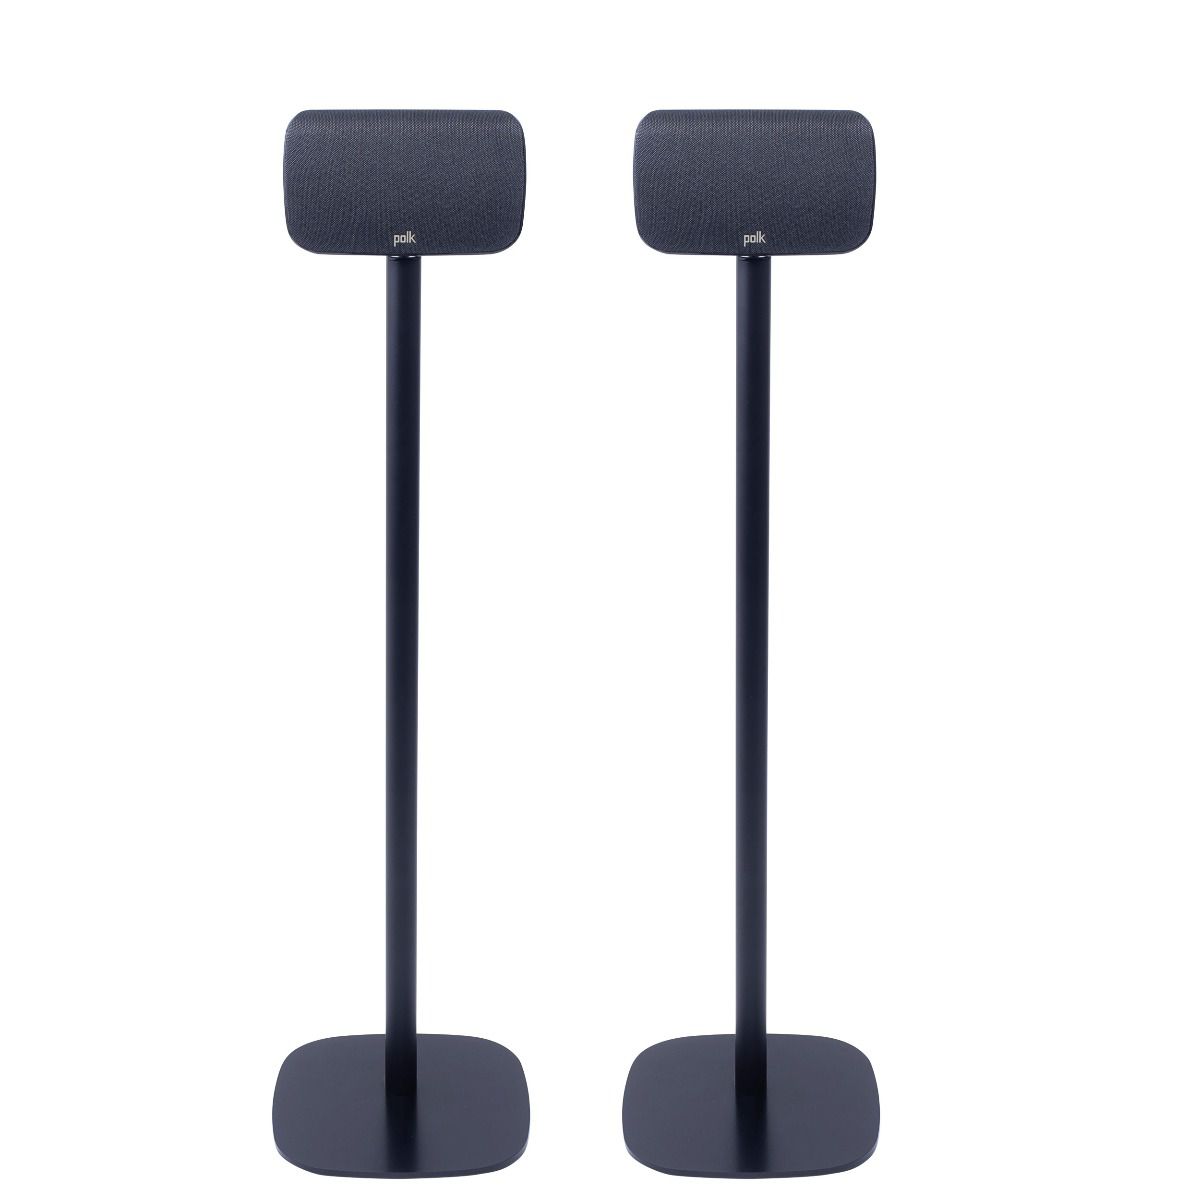 Stand loudspeaker from Canton buy online